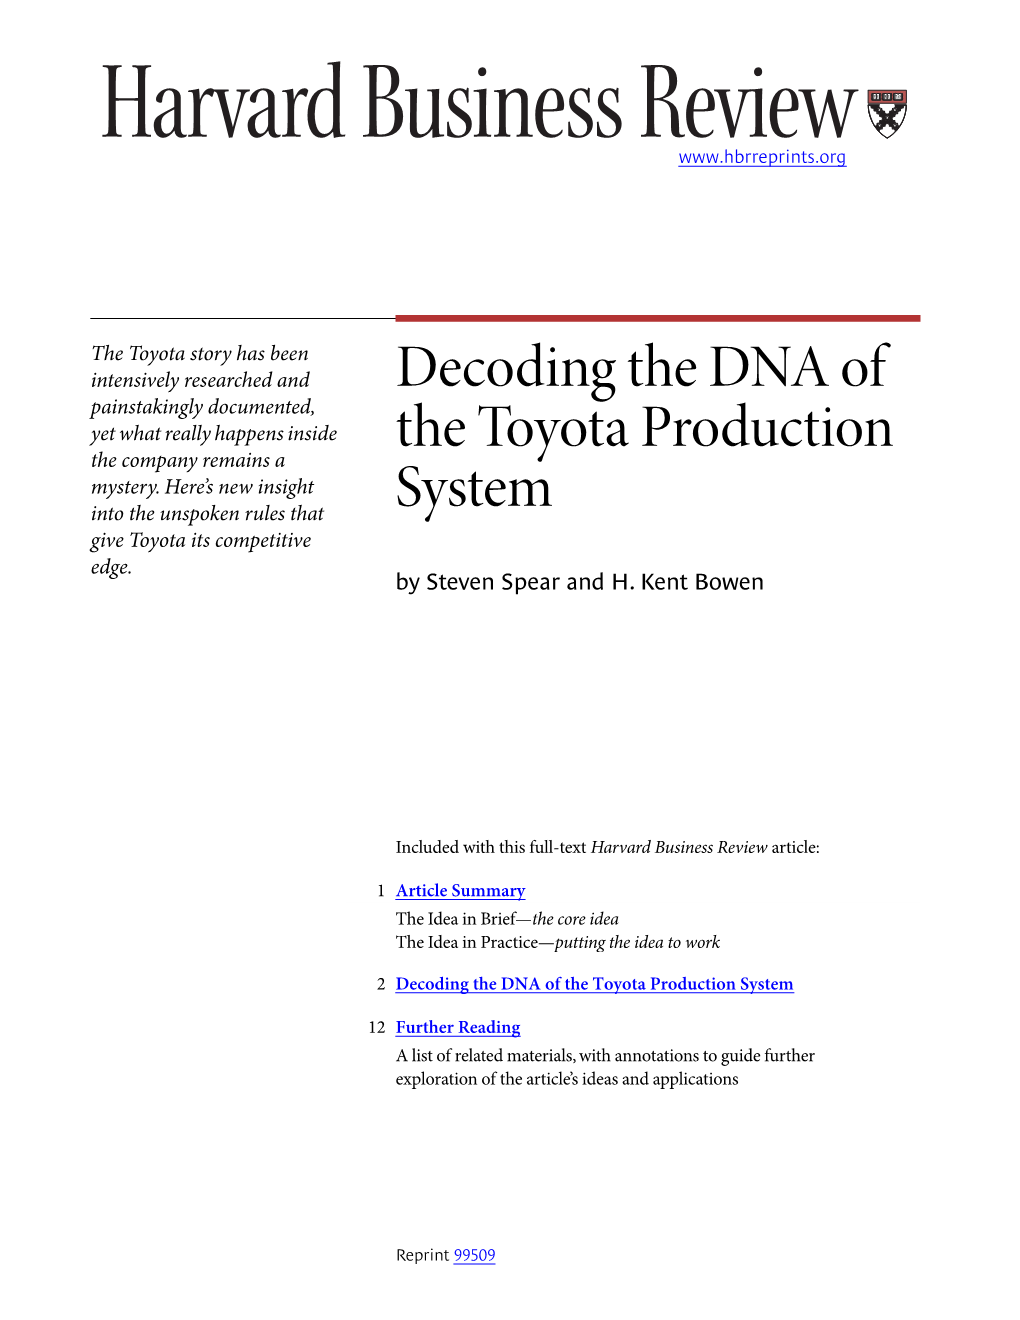 Decoding the DNA of the Toyota Production System